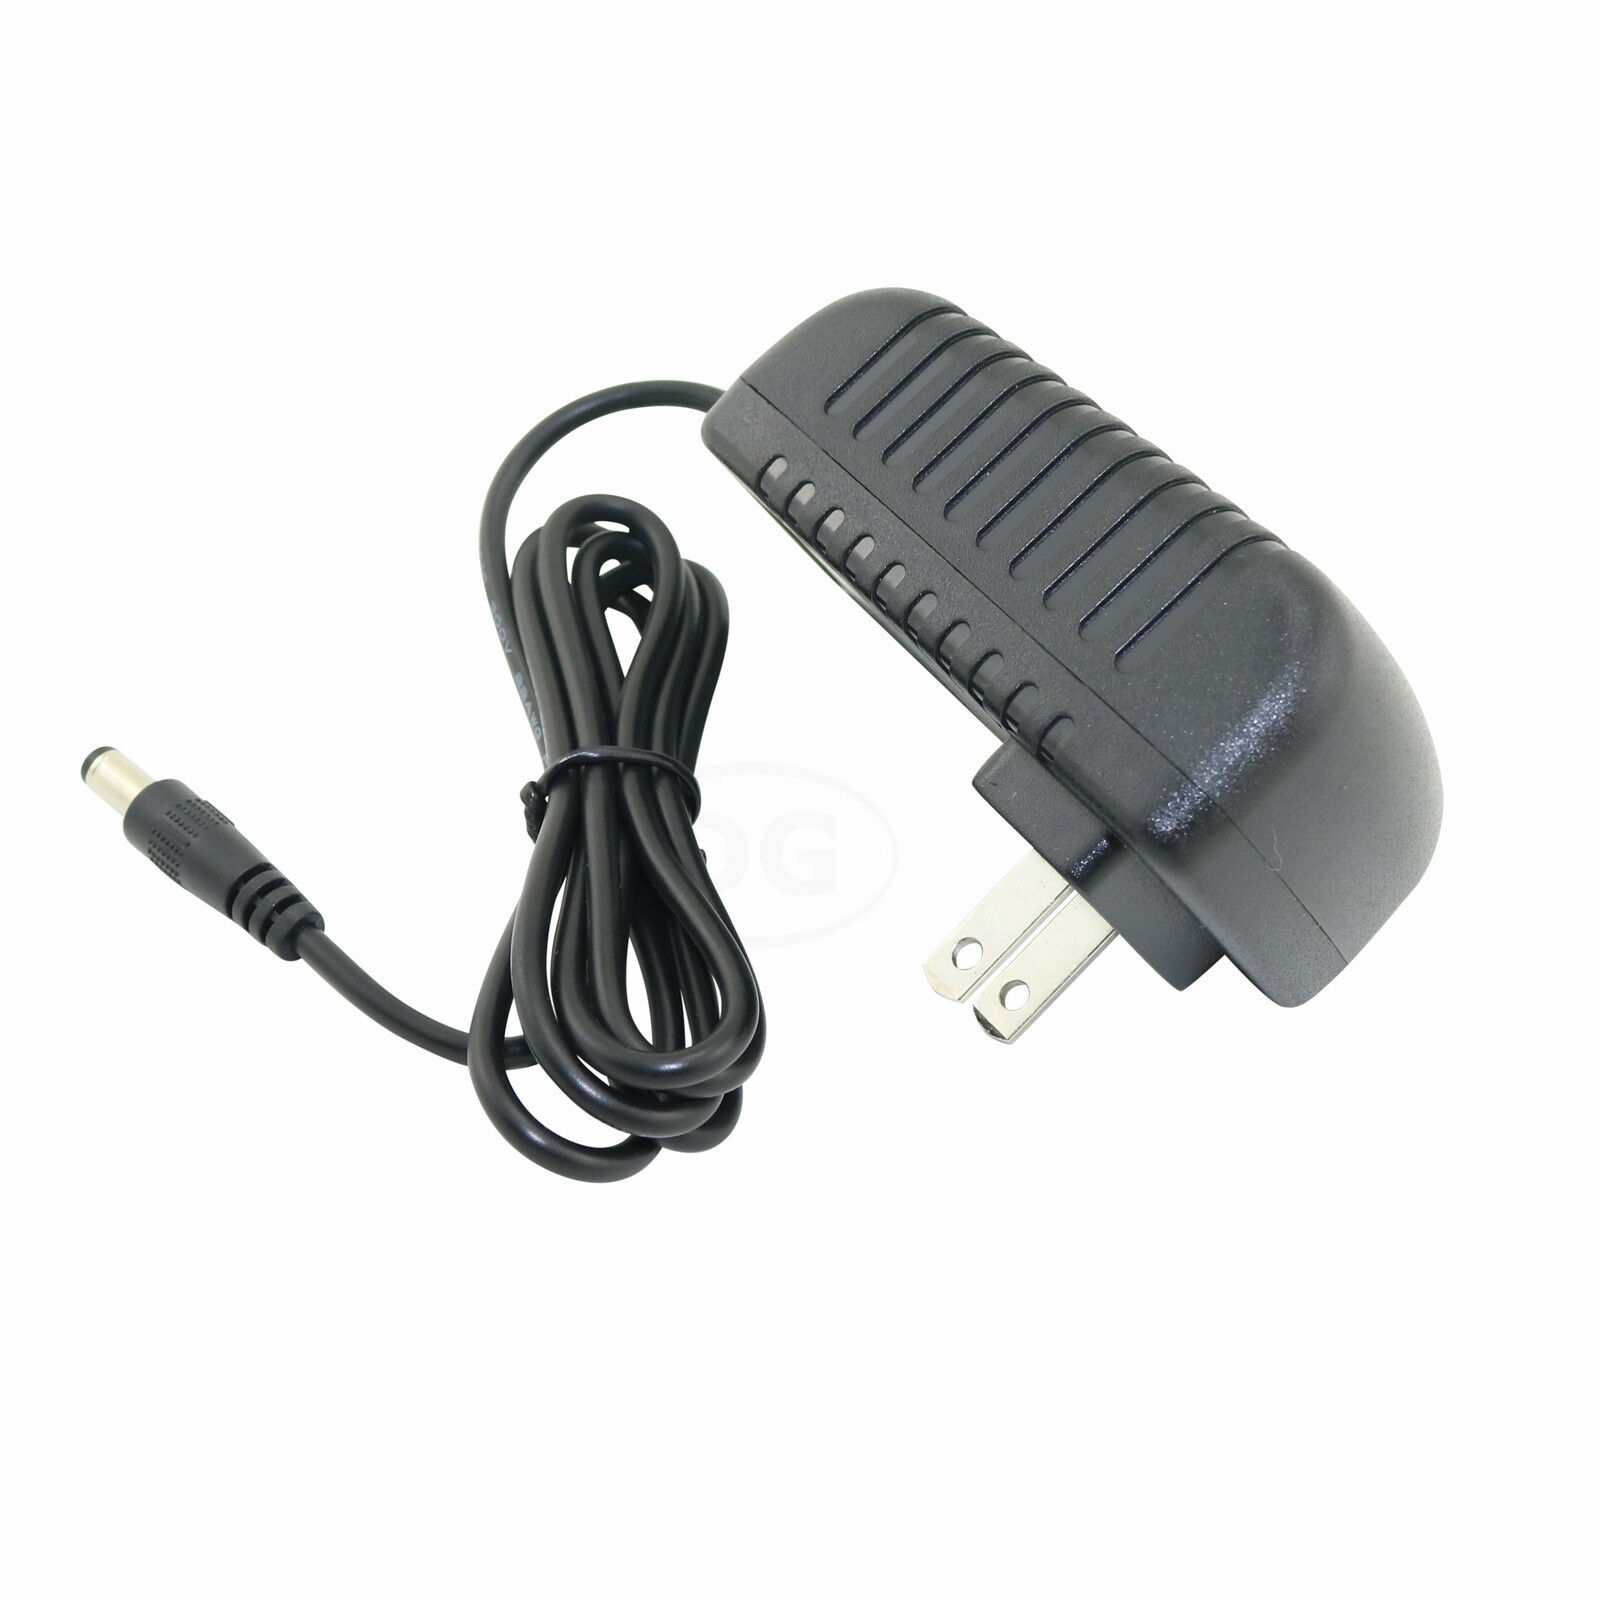 New 12V Casio Piano PX-200 AD-A12150LW Power Supply AC Adapter